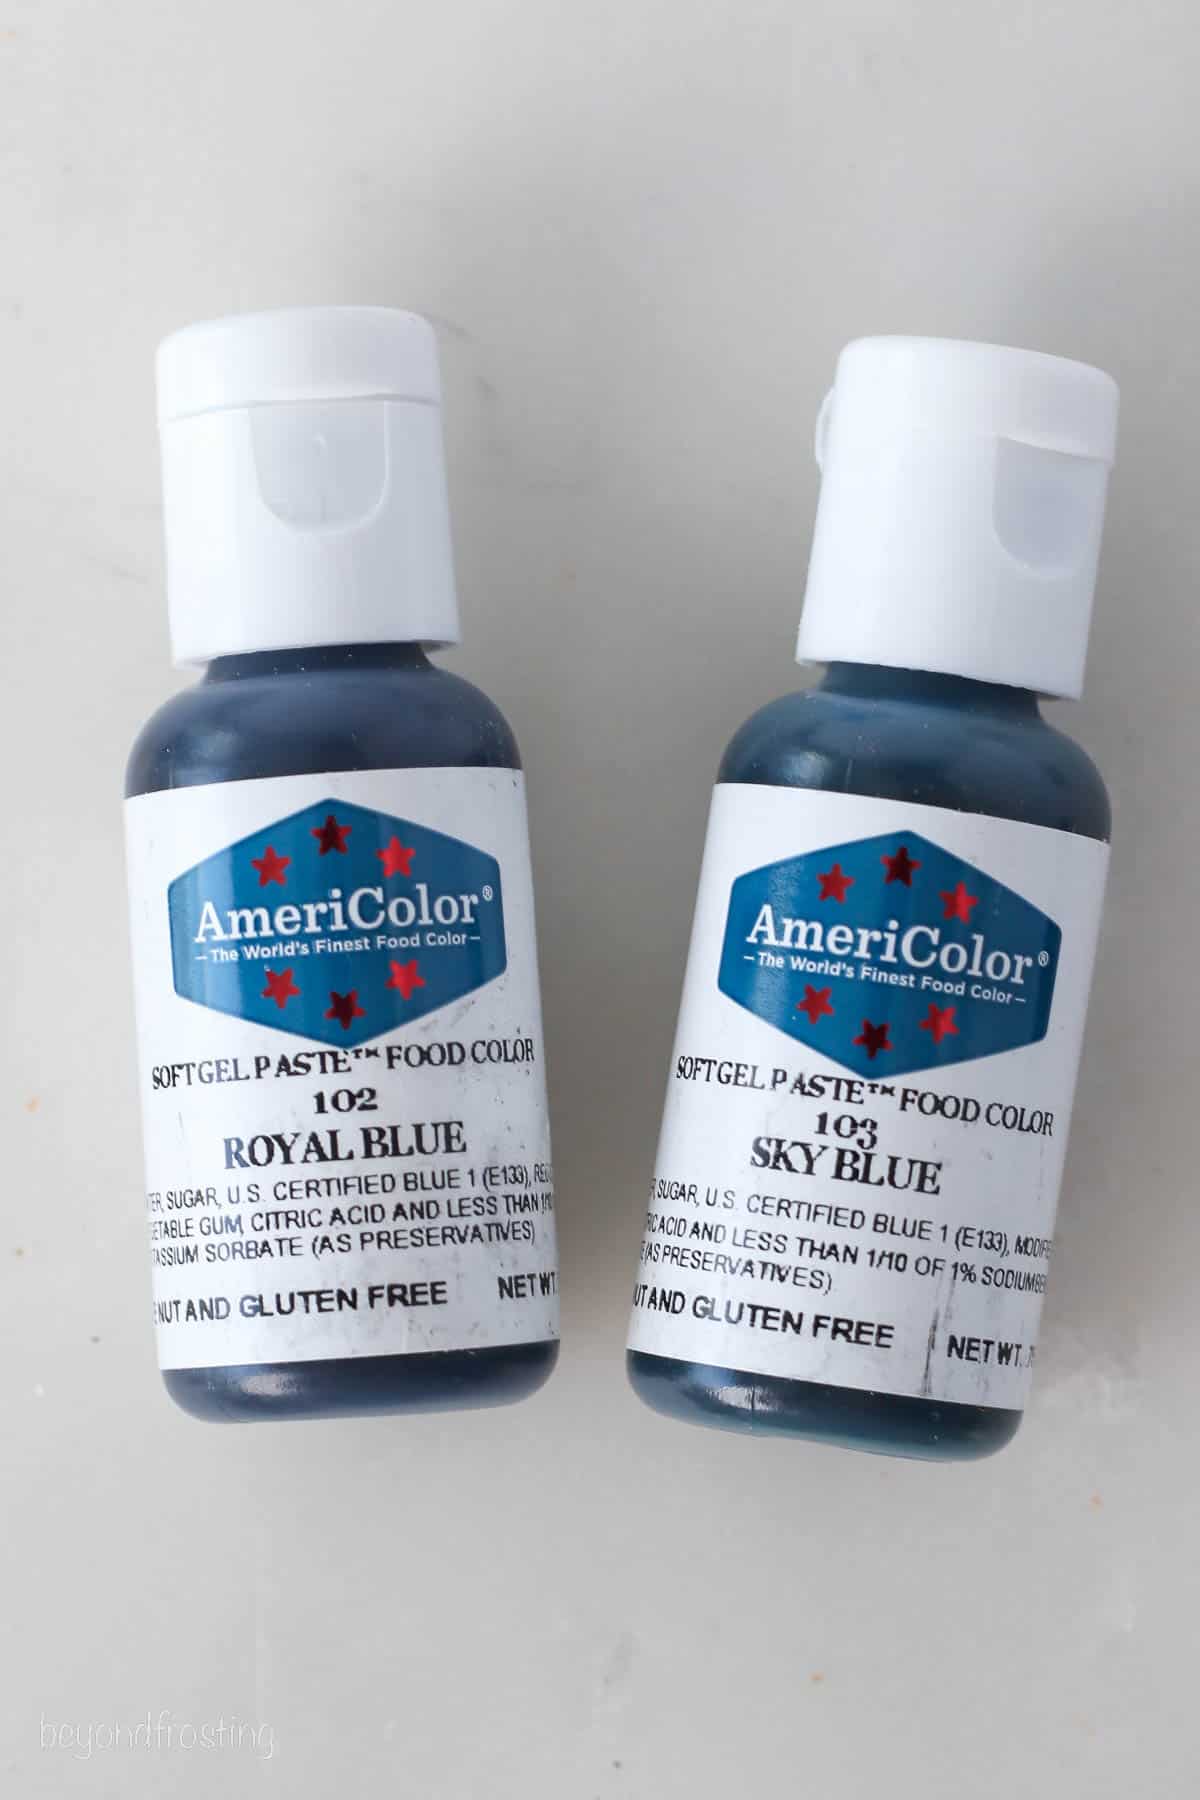 Two bottles of AmeriColor gel food dyes in Royal Blue and Sky Blue.